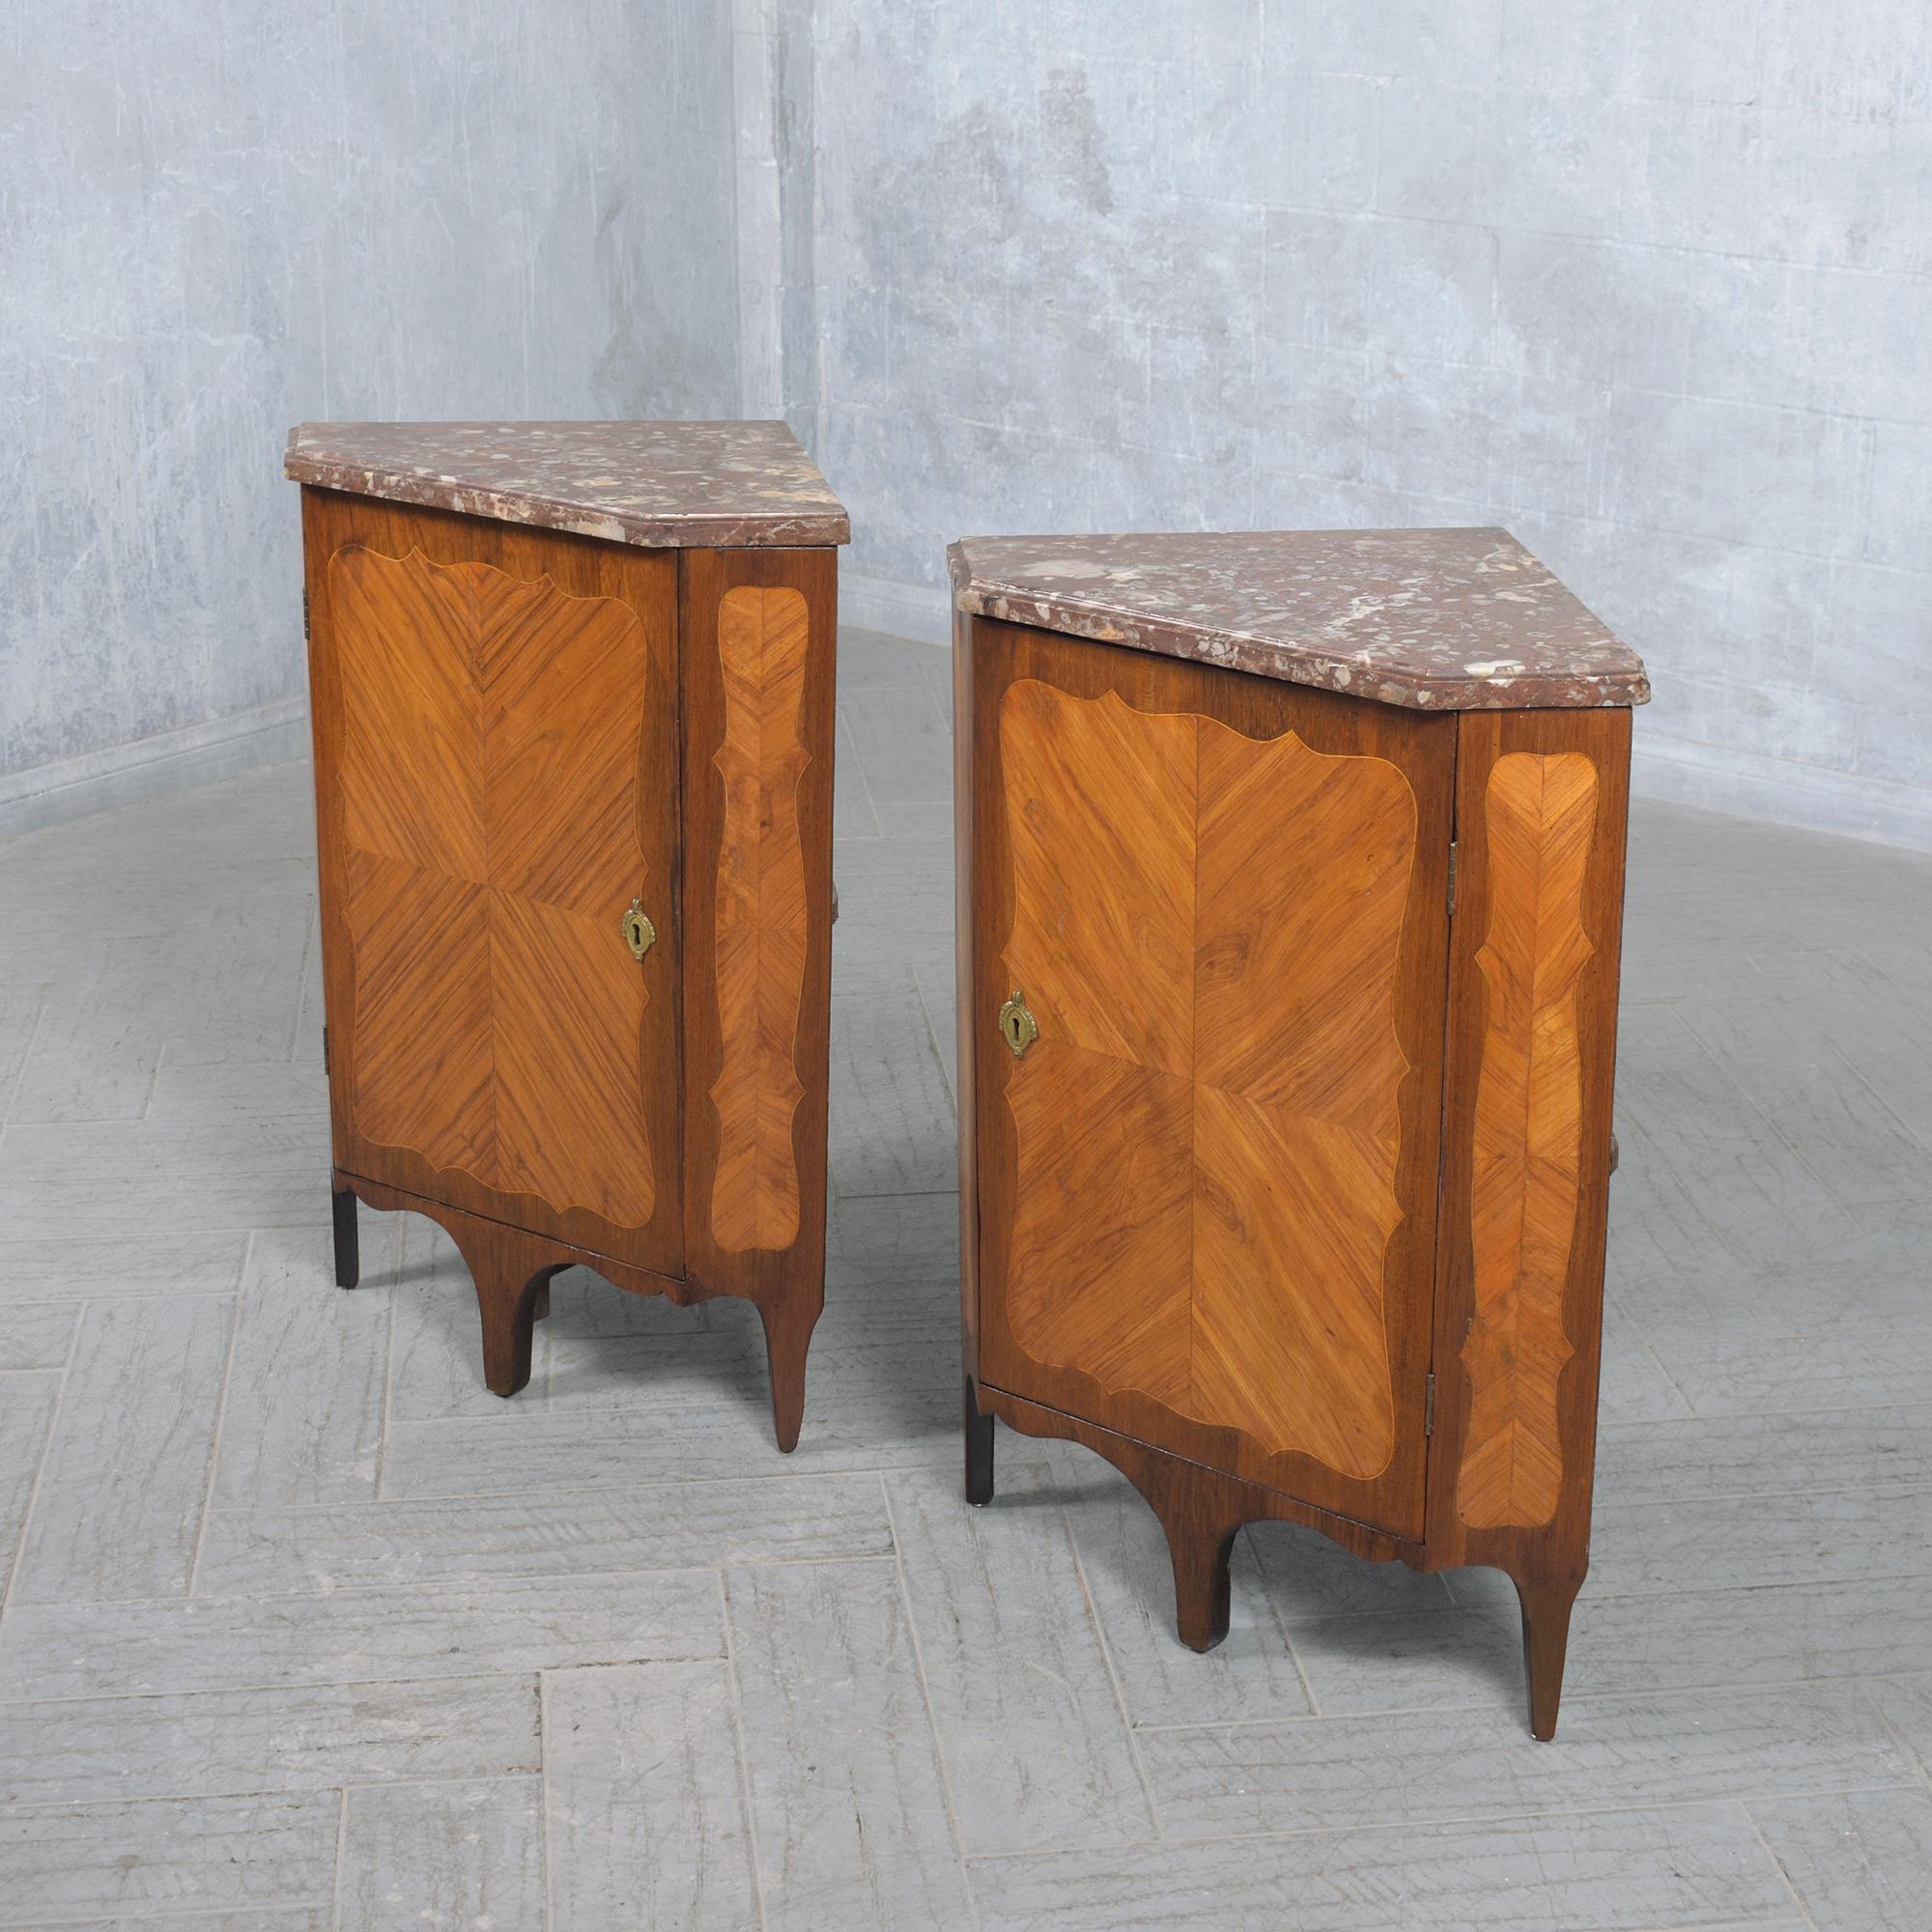 Late 18th-Century French Corner Cabinets with Marble Tops: Restored Elegance For Sale 2